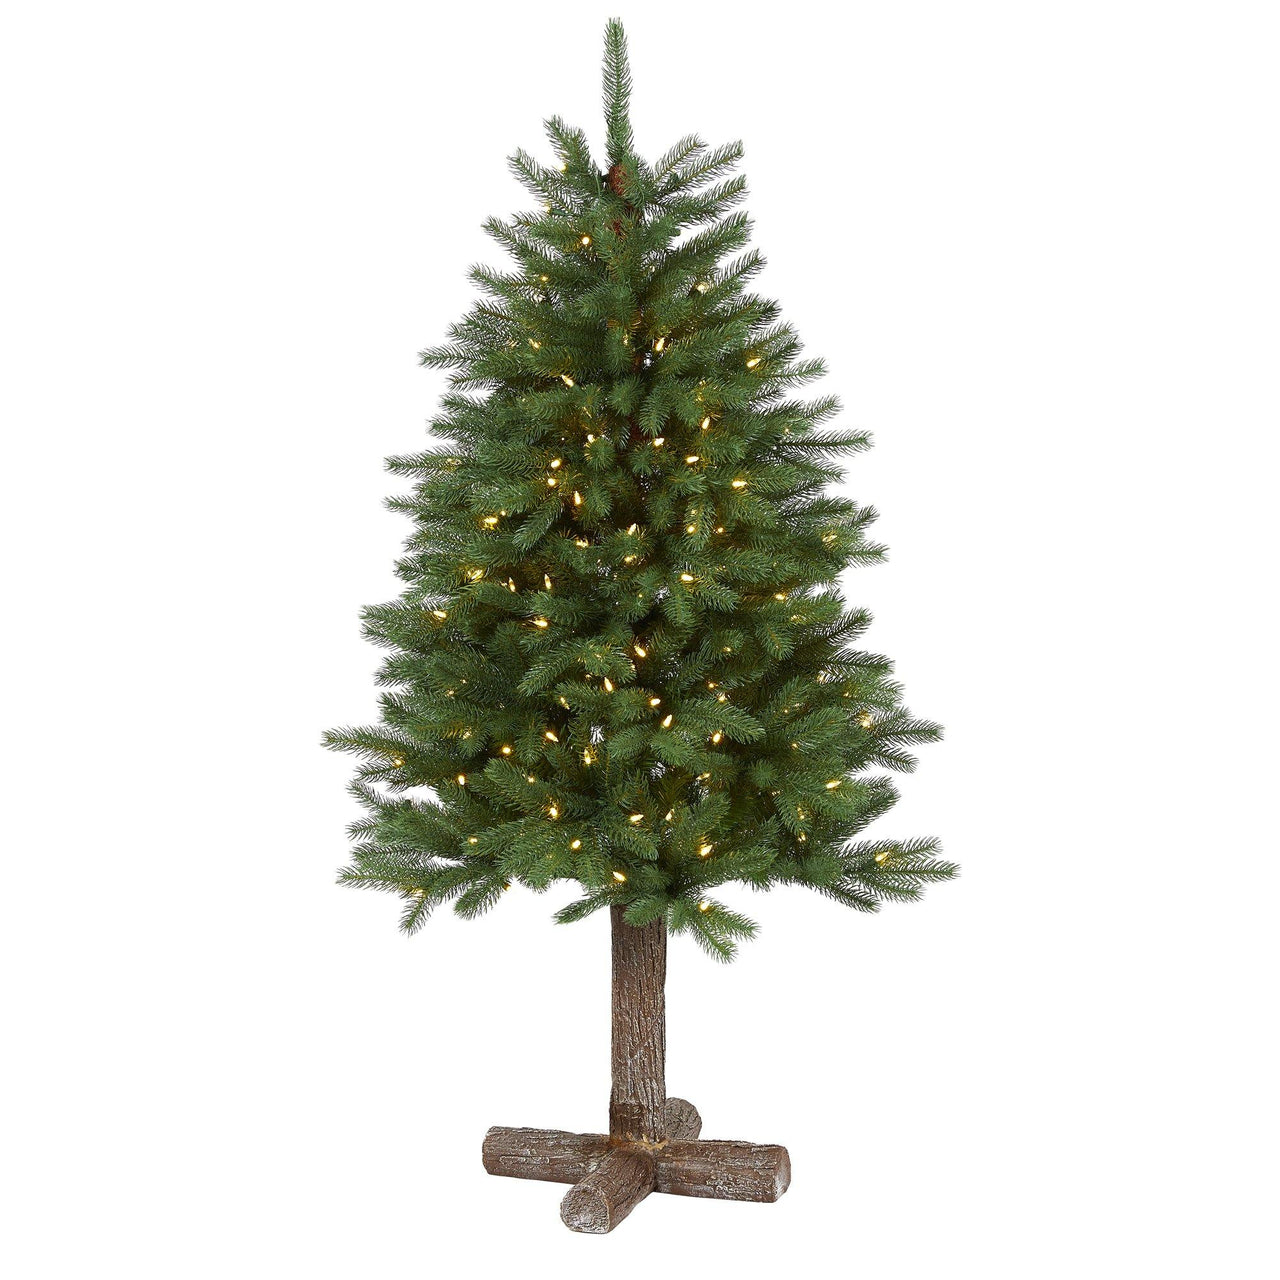 5' Napa Valley Pine Artificial Christmas Tree with 200 Warm White LED Lights, 335 Bendable Branches on a Faux Wood Stand